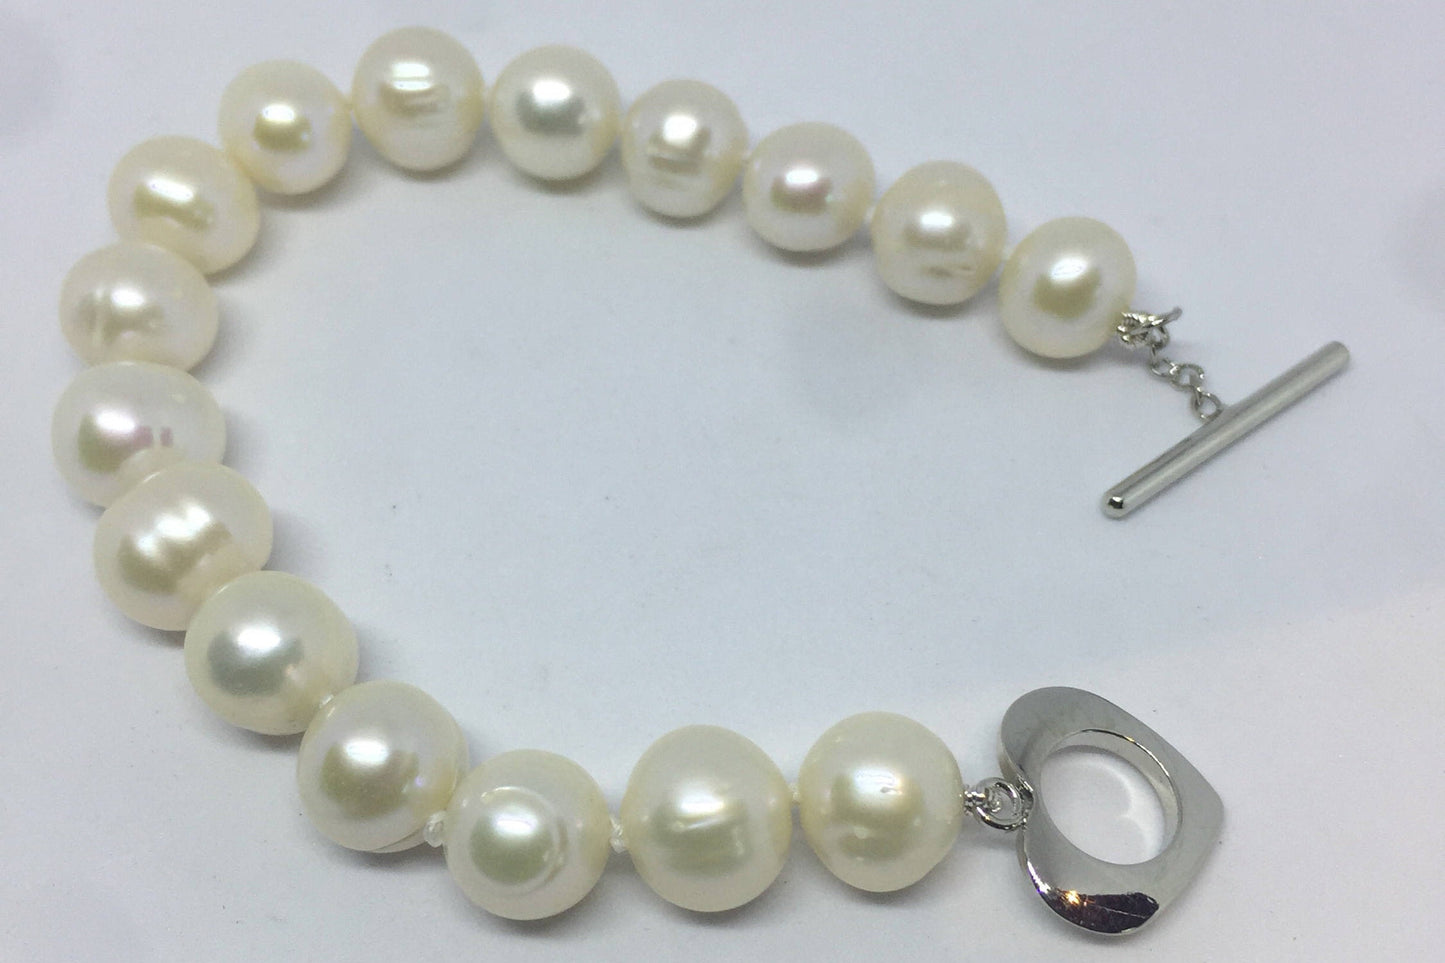 Vintage Pearl Bracelet in 925 Sterling Silver with Heart Toggle